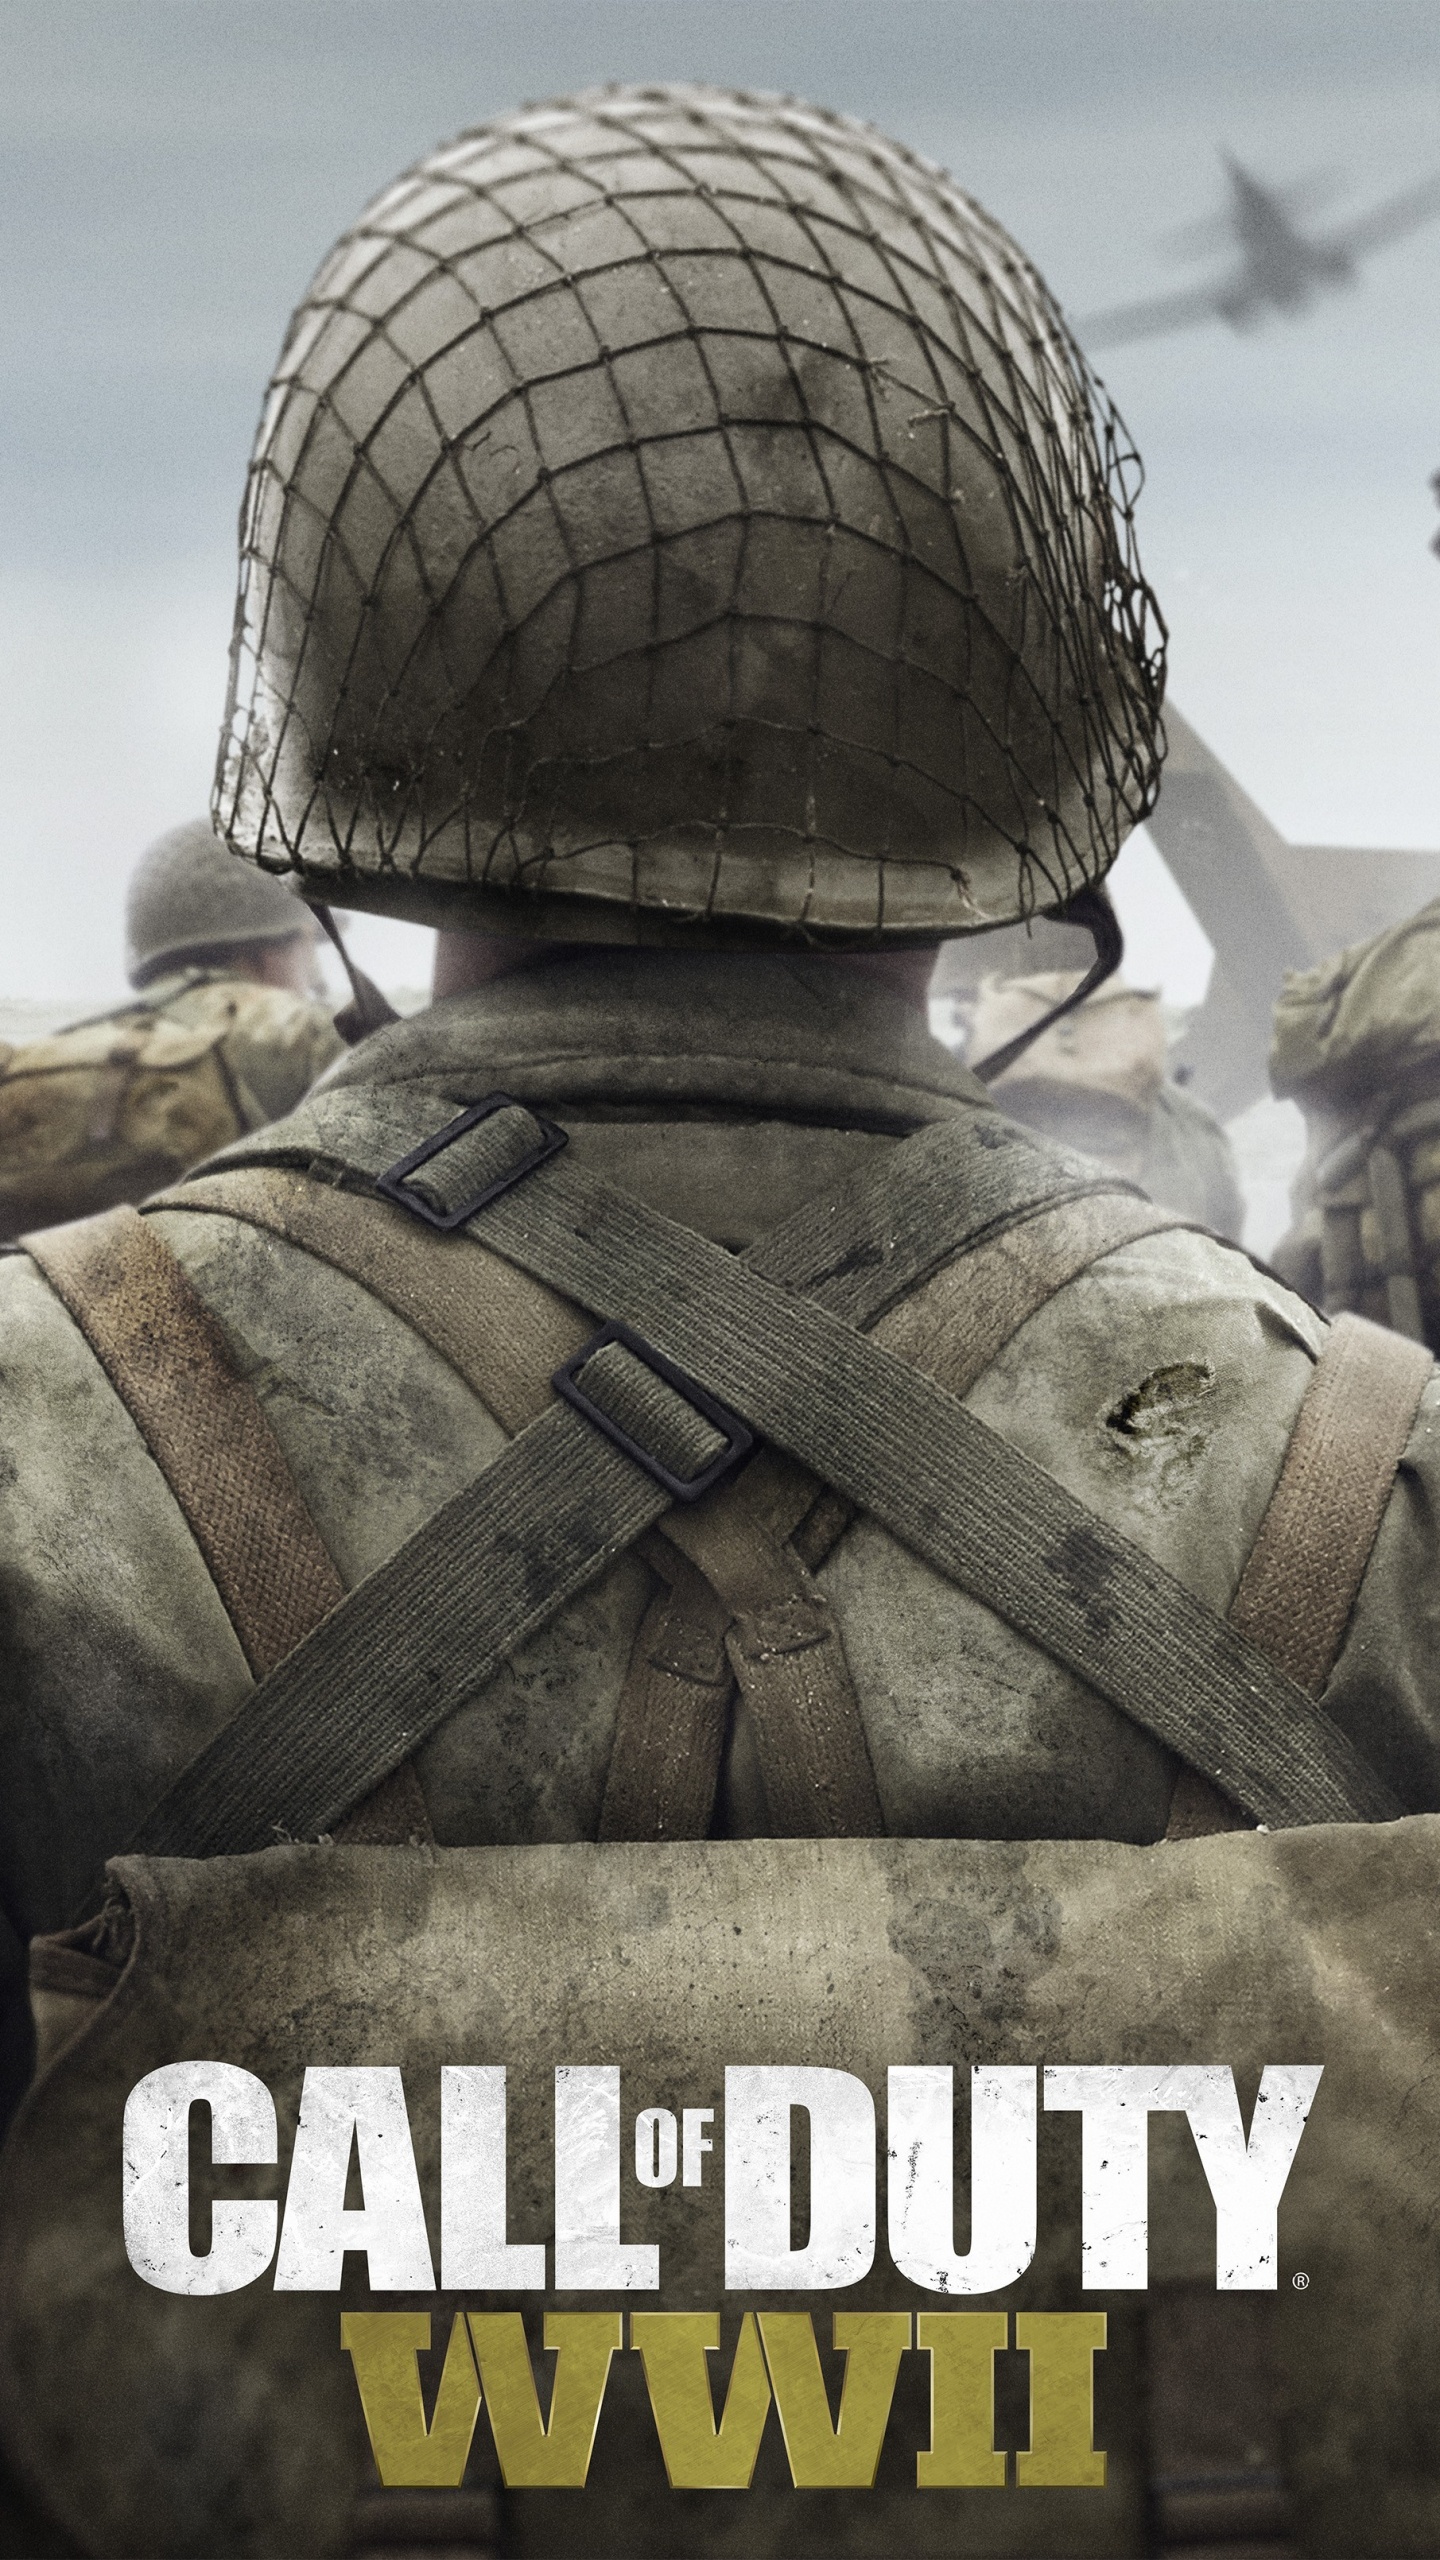 Call of Duty Ww2, Call of Duty WWII, Activision, Sledgehammer Games, Soldat. Wallpaper in 1440x2560 Resolution